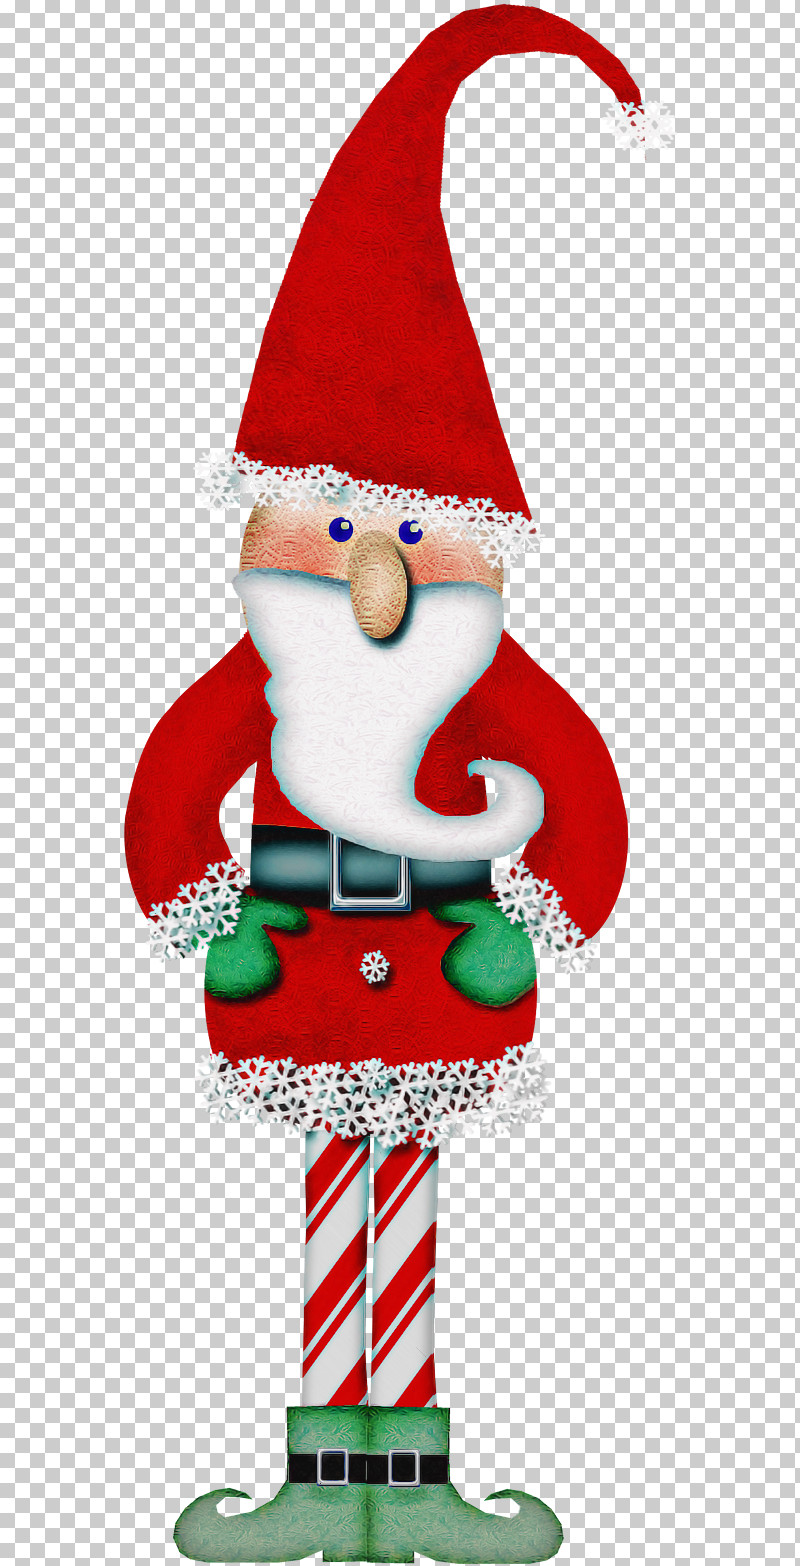 Santa Claus PNG, Clipart, Christmas, Christmas Decoration, Christmas Stocking, Holiday Ornament, Interior Design Free PNG Download